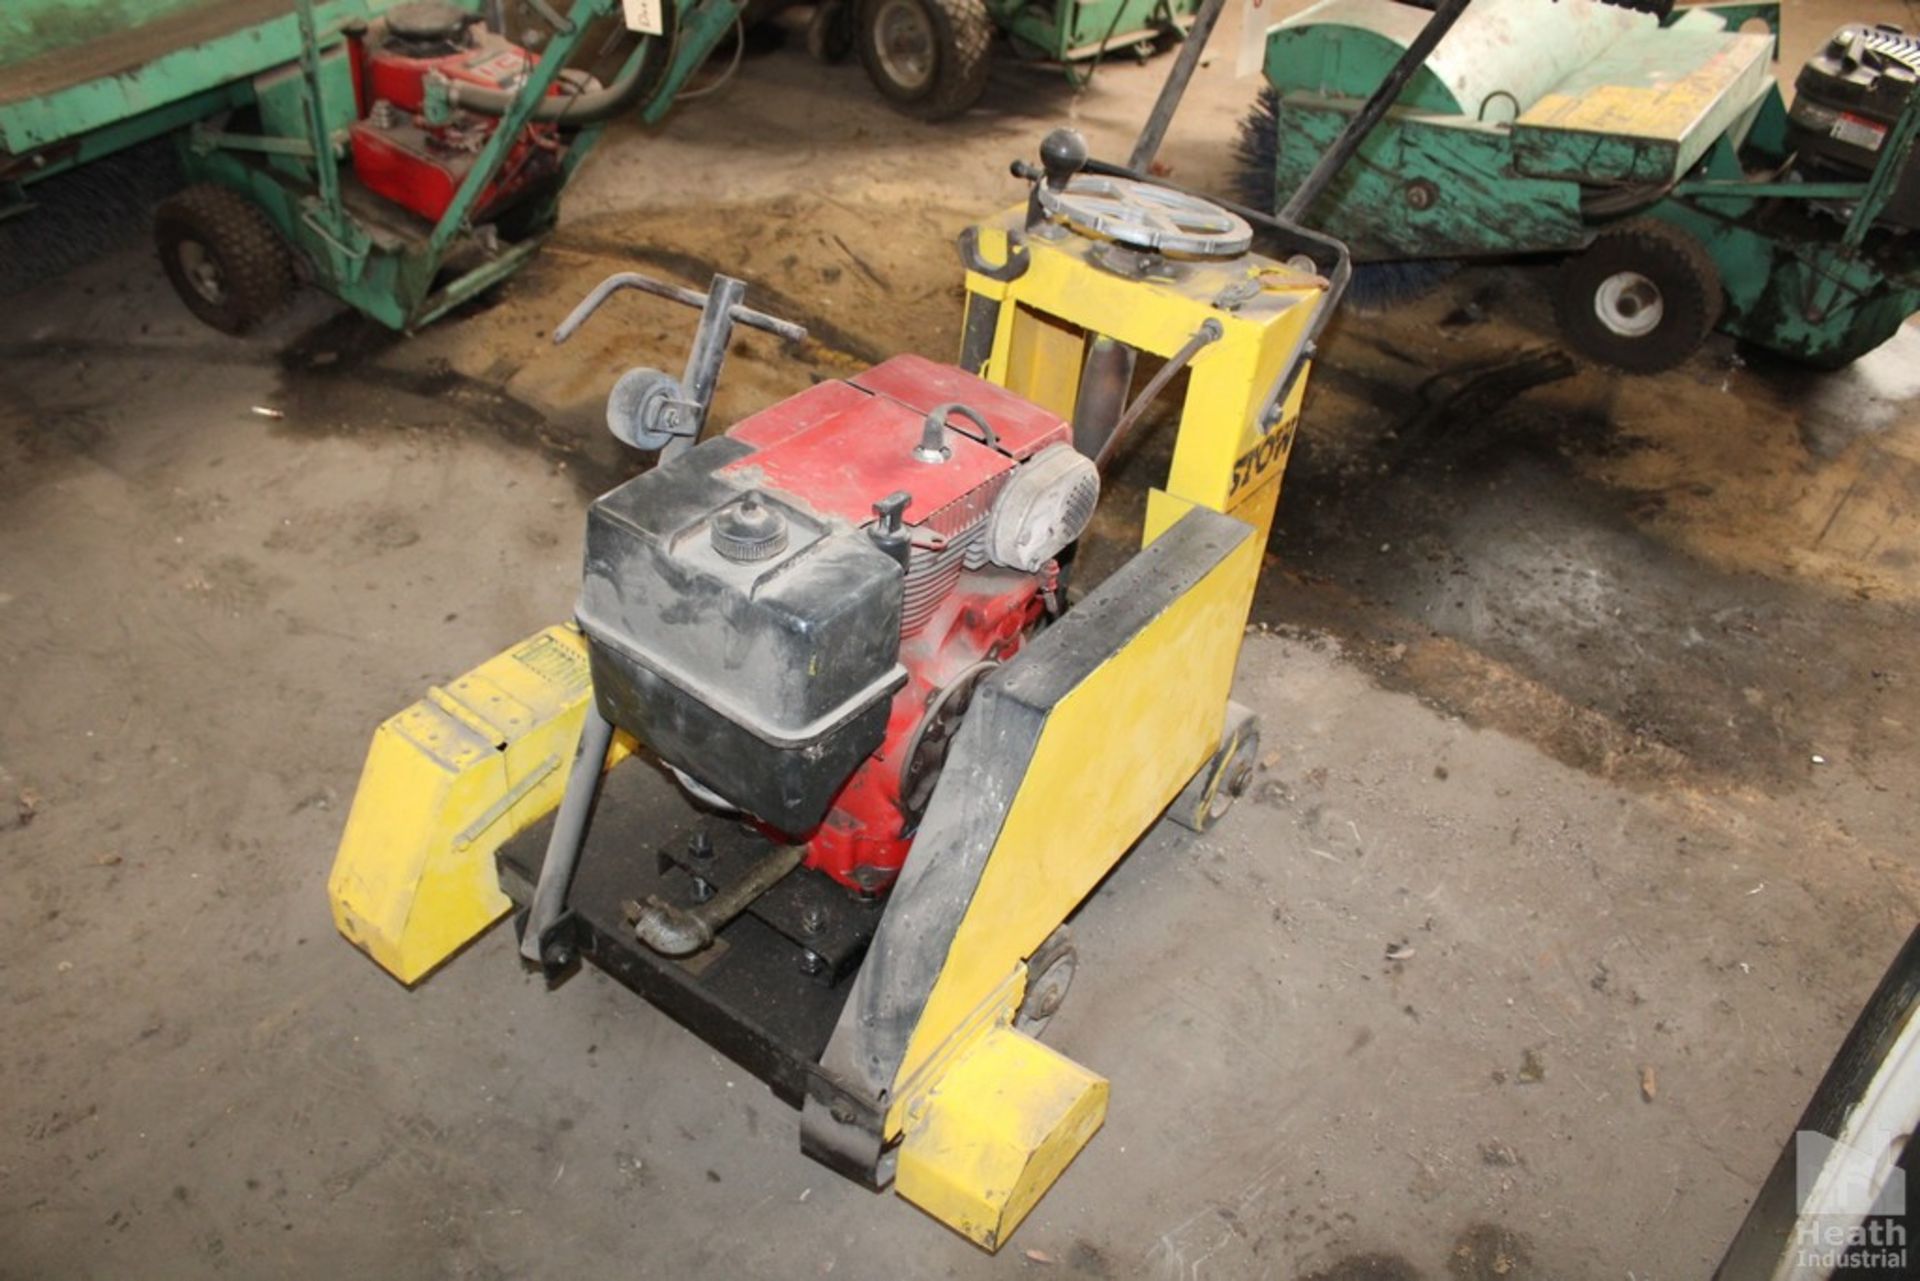 STOW CUTTER 2 CONCRETE SAW WITH KOHLER MAGNUM 8 ENGINE - Image 3 of 4